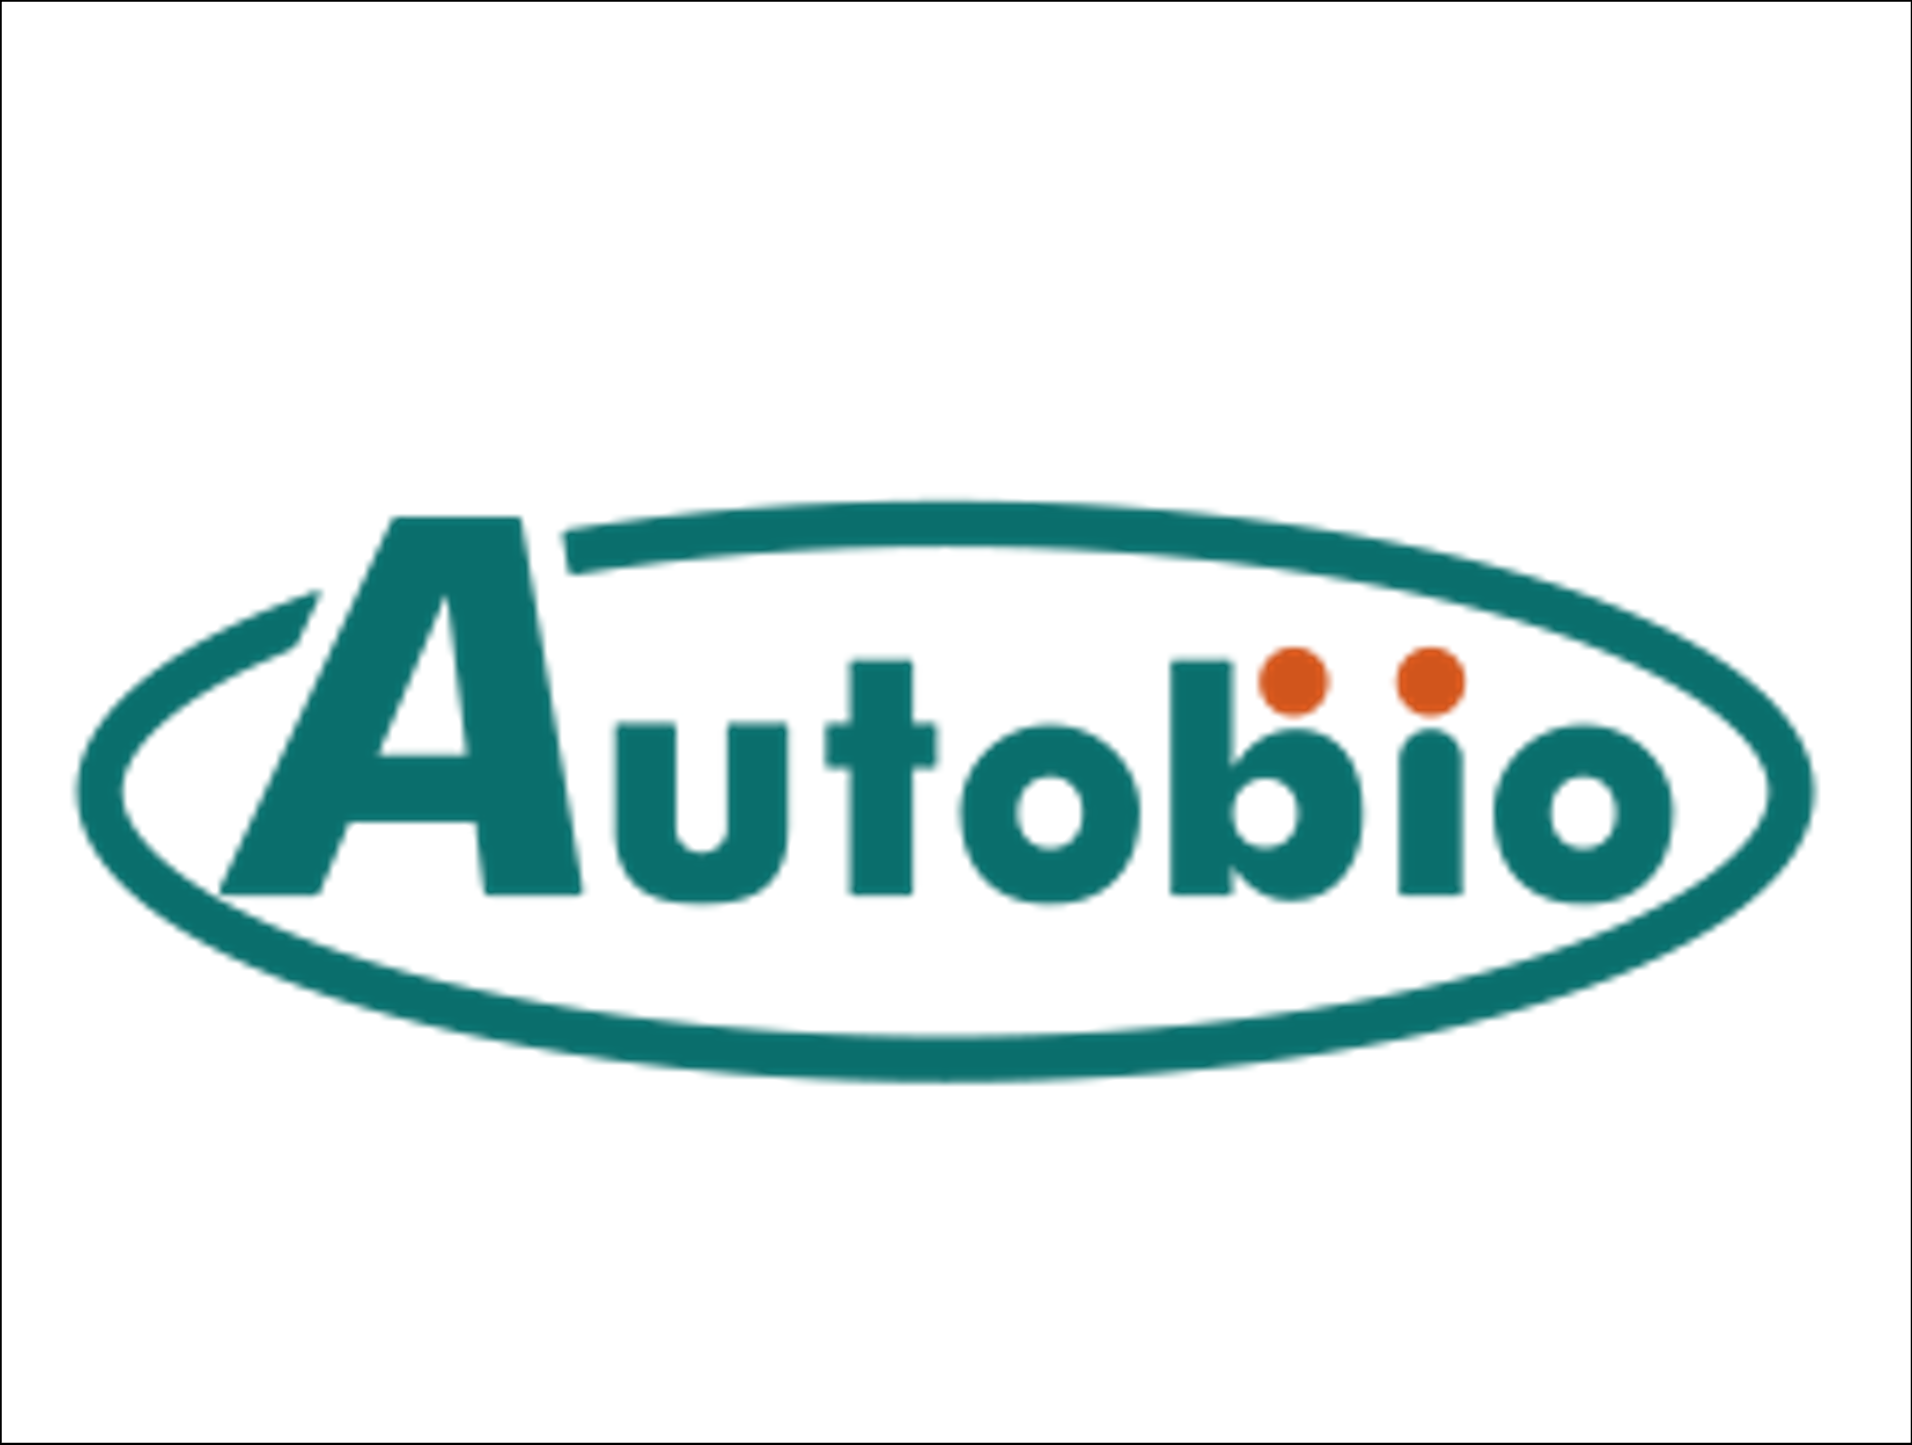 Autobio Diagnostics intends to invest CNY100 million to expand in vitro diagnostic industry layout